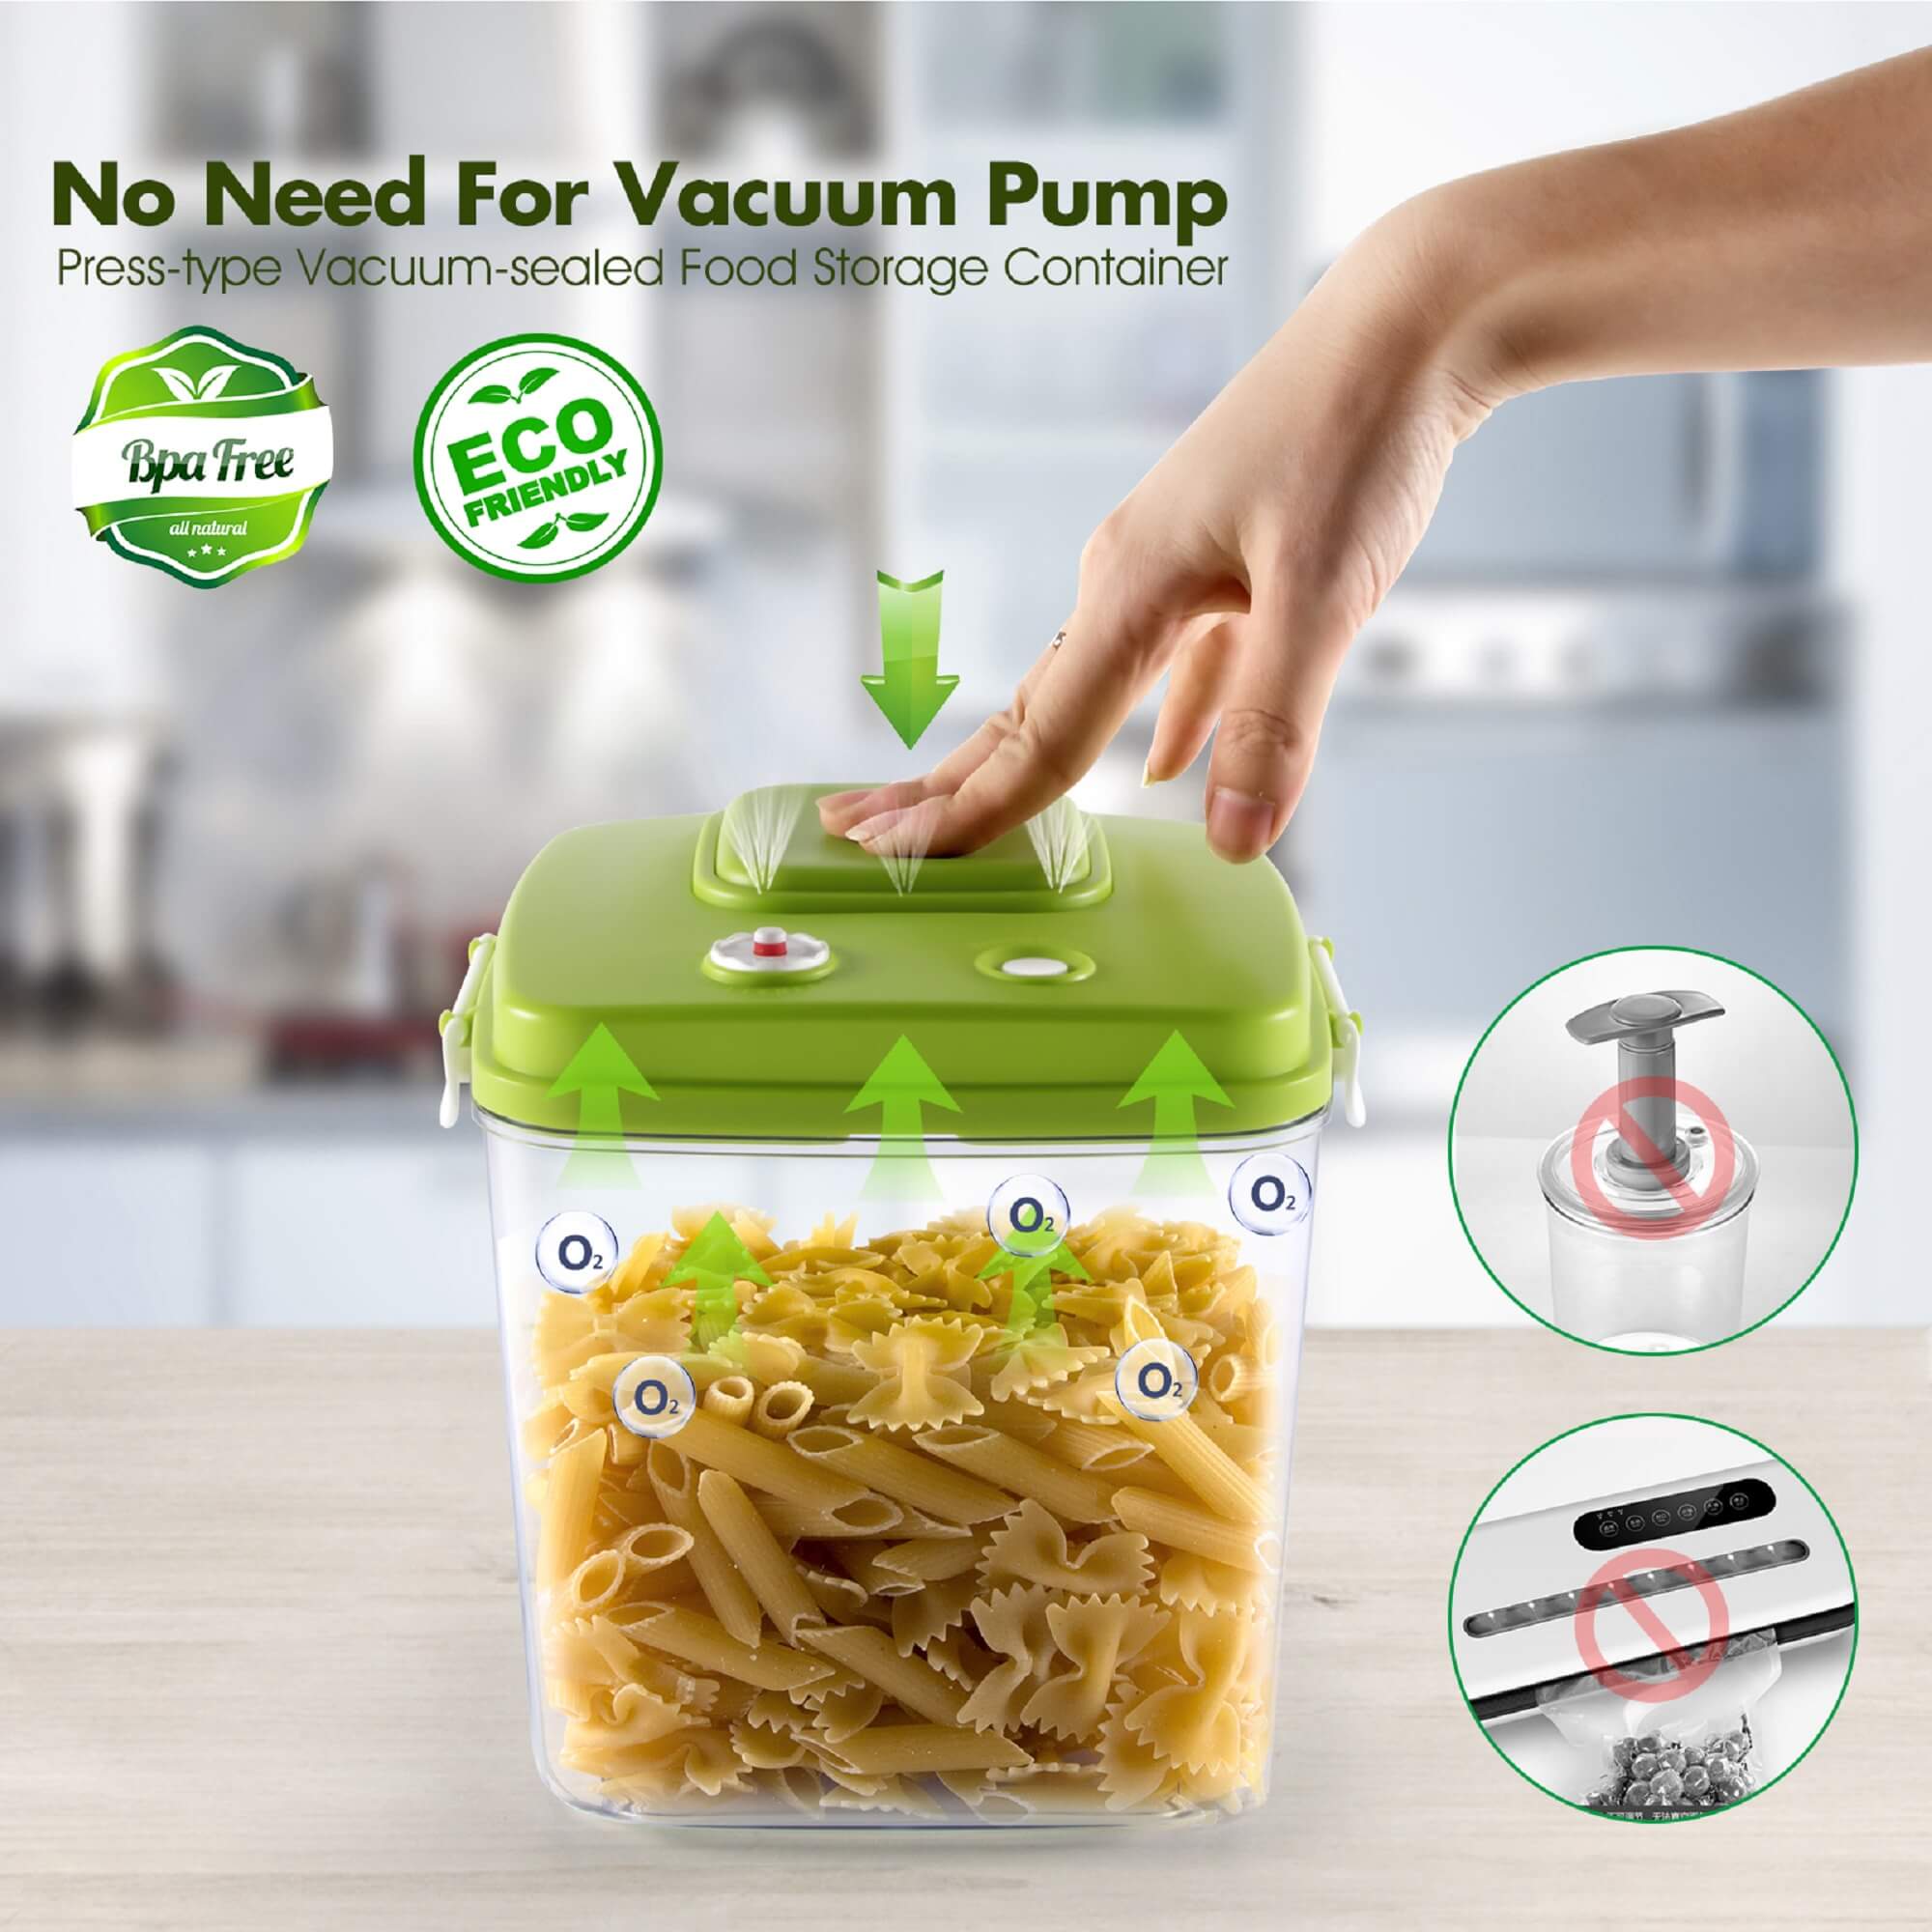 MasterTop Kitchen Household Set of 5 Food Storage Containers, Size: 0.5L, 1.4L, 3.0L, 1.2L, Green